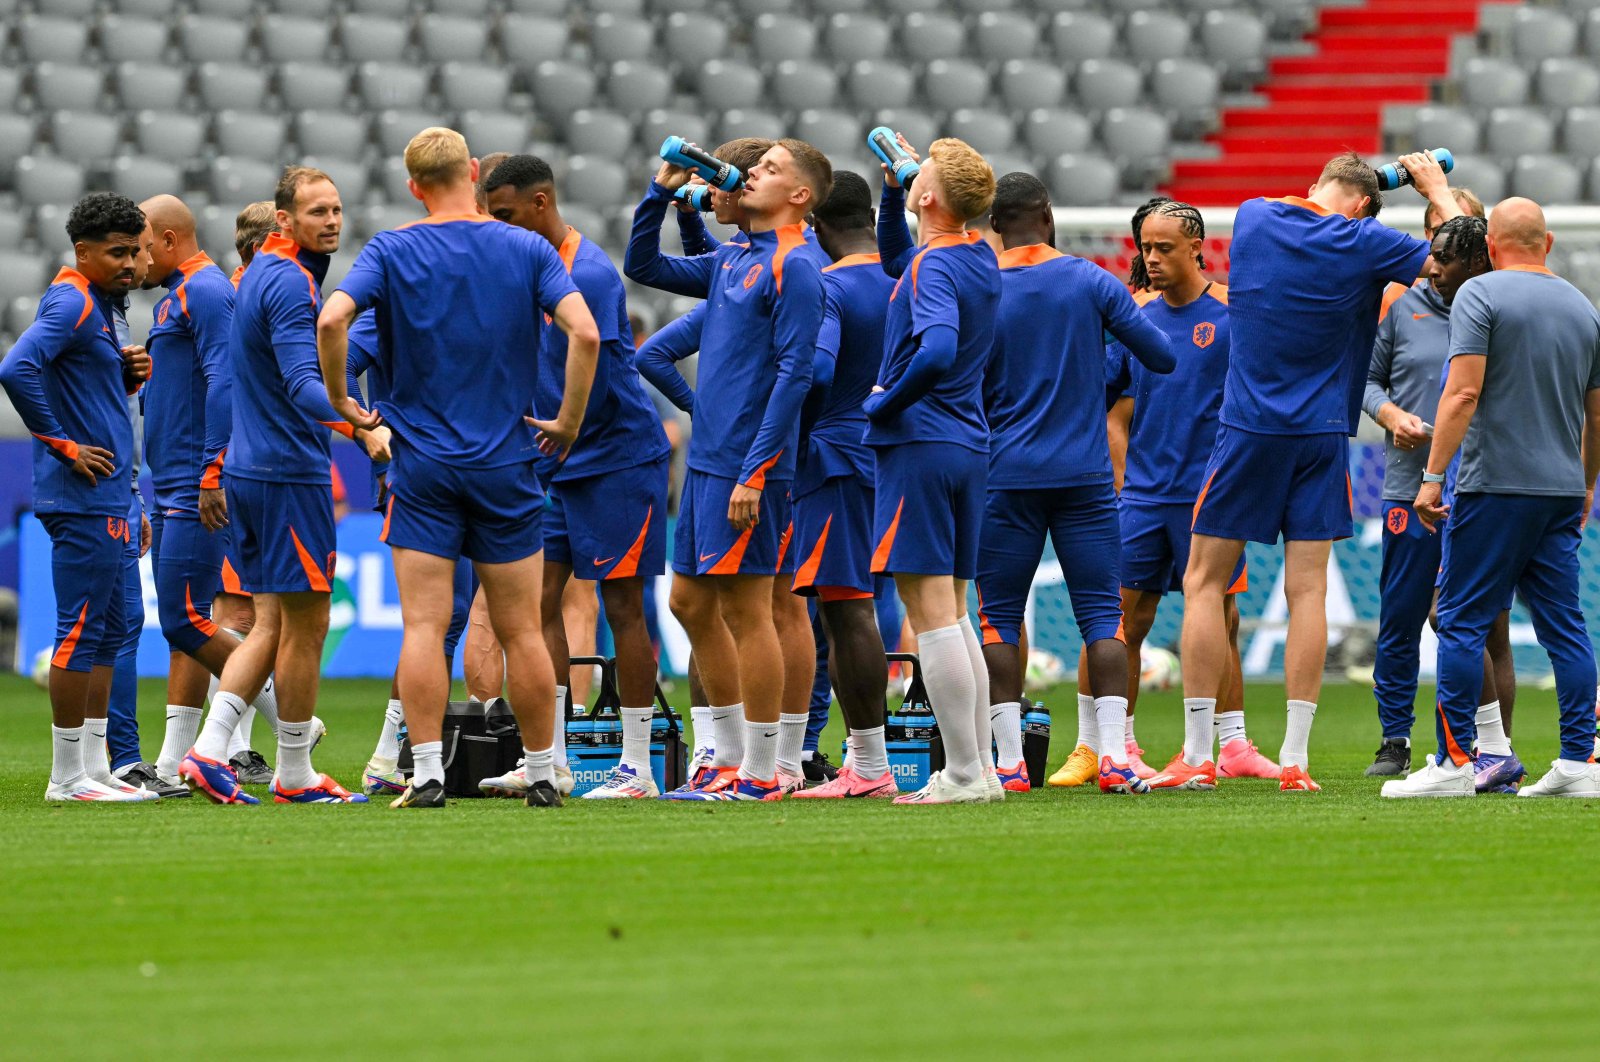 From left, Netherlands&#039; midfielder #20 Ian Maatsen, Netherlands&#039; defender #17 Daley Blind, Netherlands&#039; midfielder #16 Joey Veerman, Netherlands&#039; forward #07 Xavi Simons and Netherlands&#039; defender #04 Virgil Van Dijk attend an MD-1 training session on the eve of the UEFA Euro 2024 round of 16 football match against Romania at the Munich Football Arena in Munich, Germany, July 1, 2024. (AFP Photo)